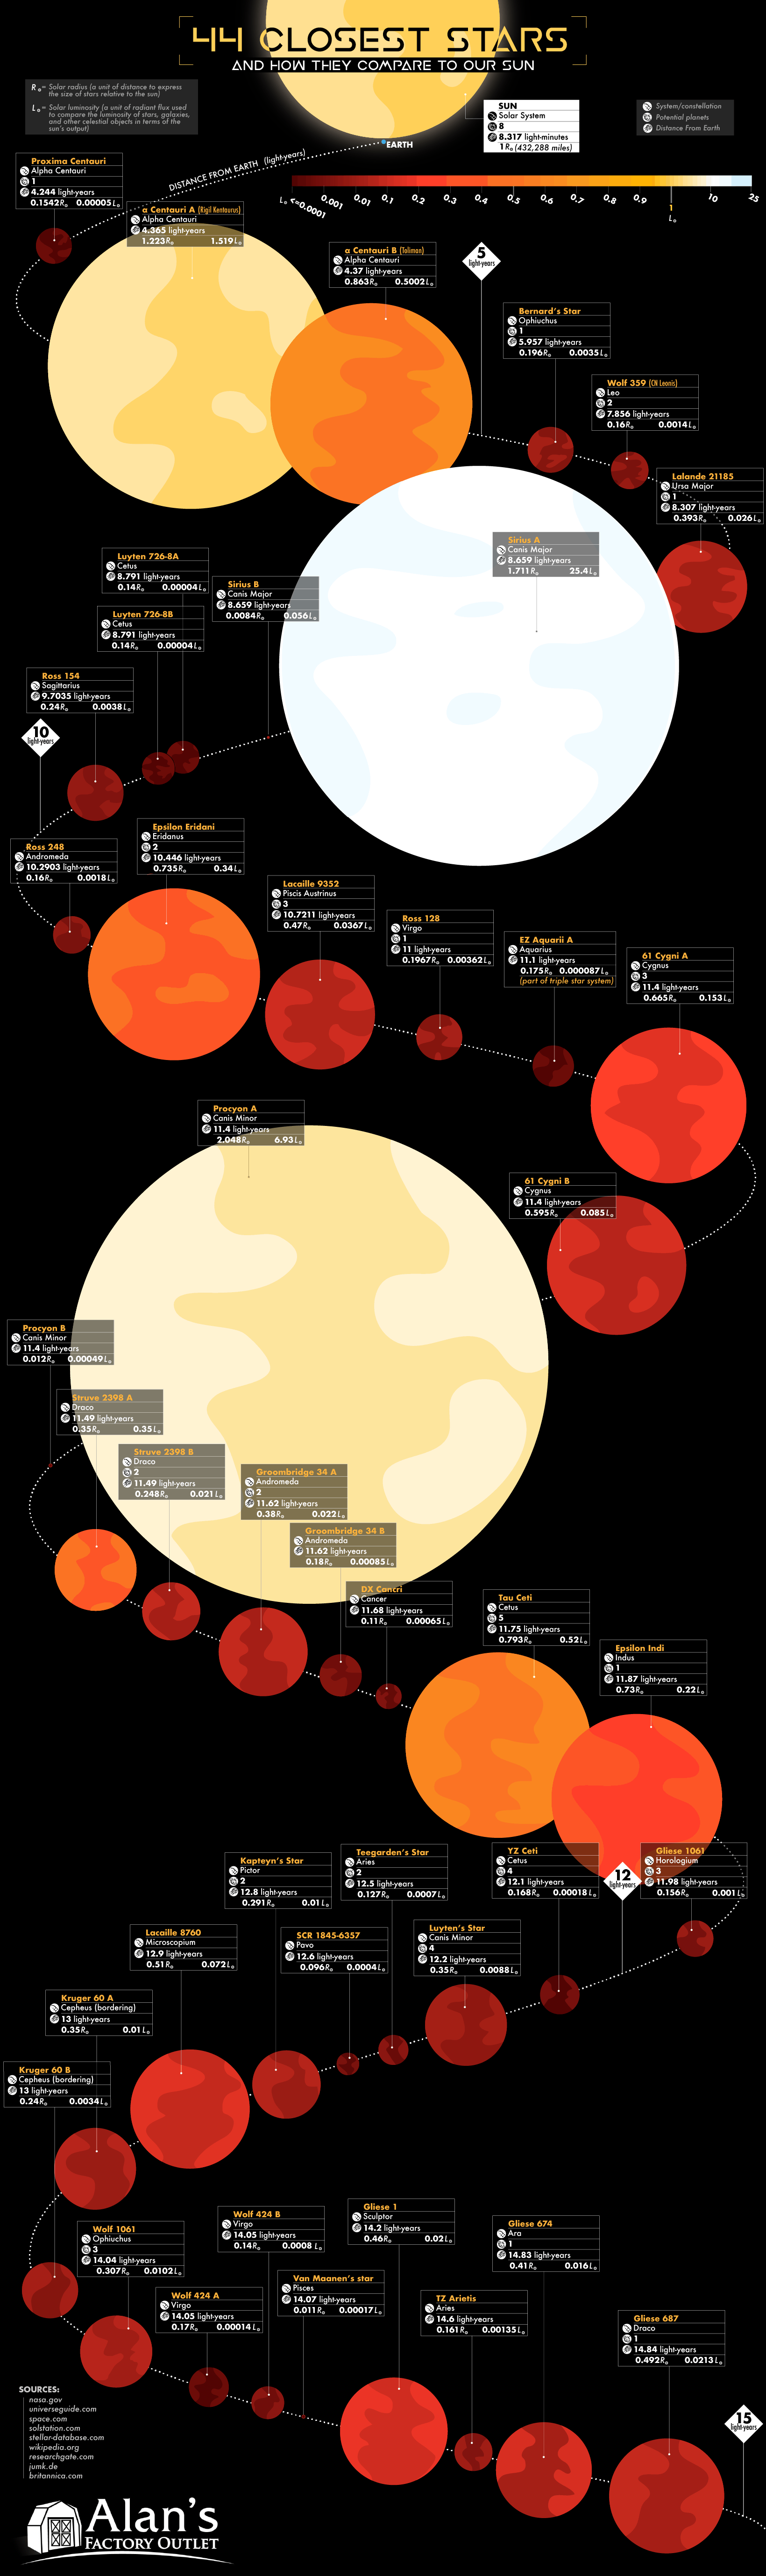 This Chart Shows The 44 Closest Stars and How They Compare to Our Sun